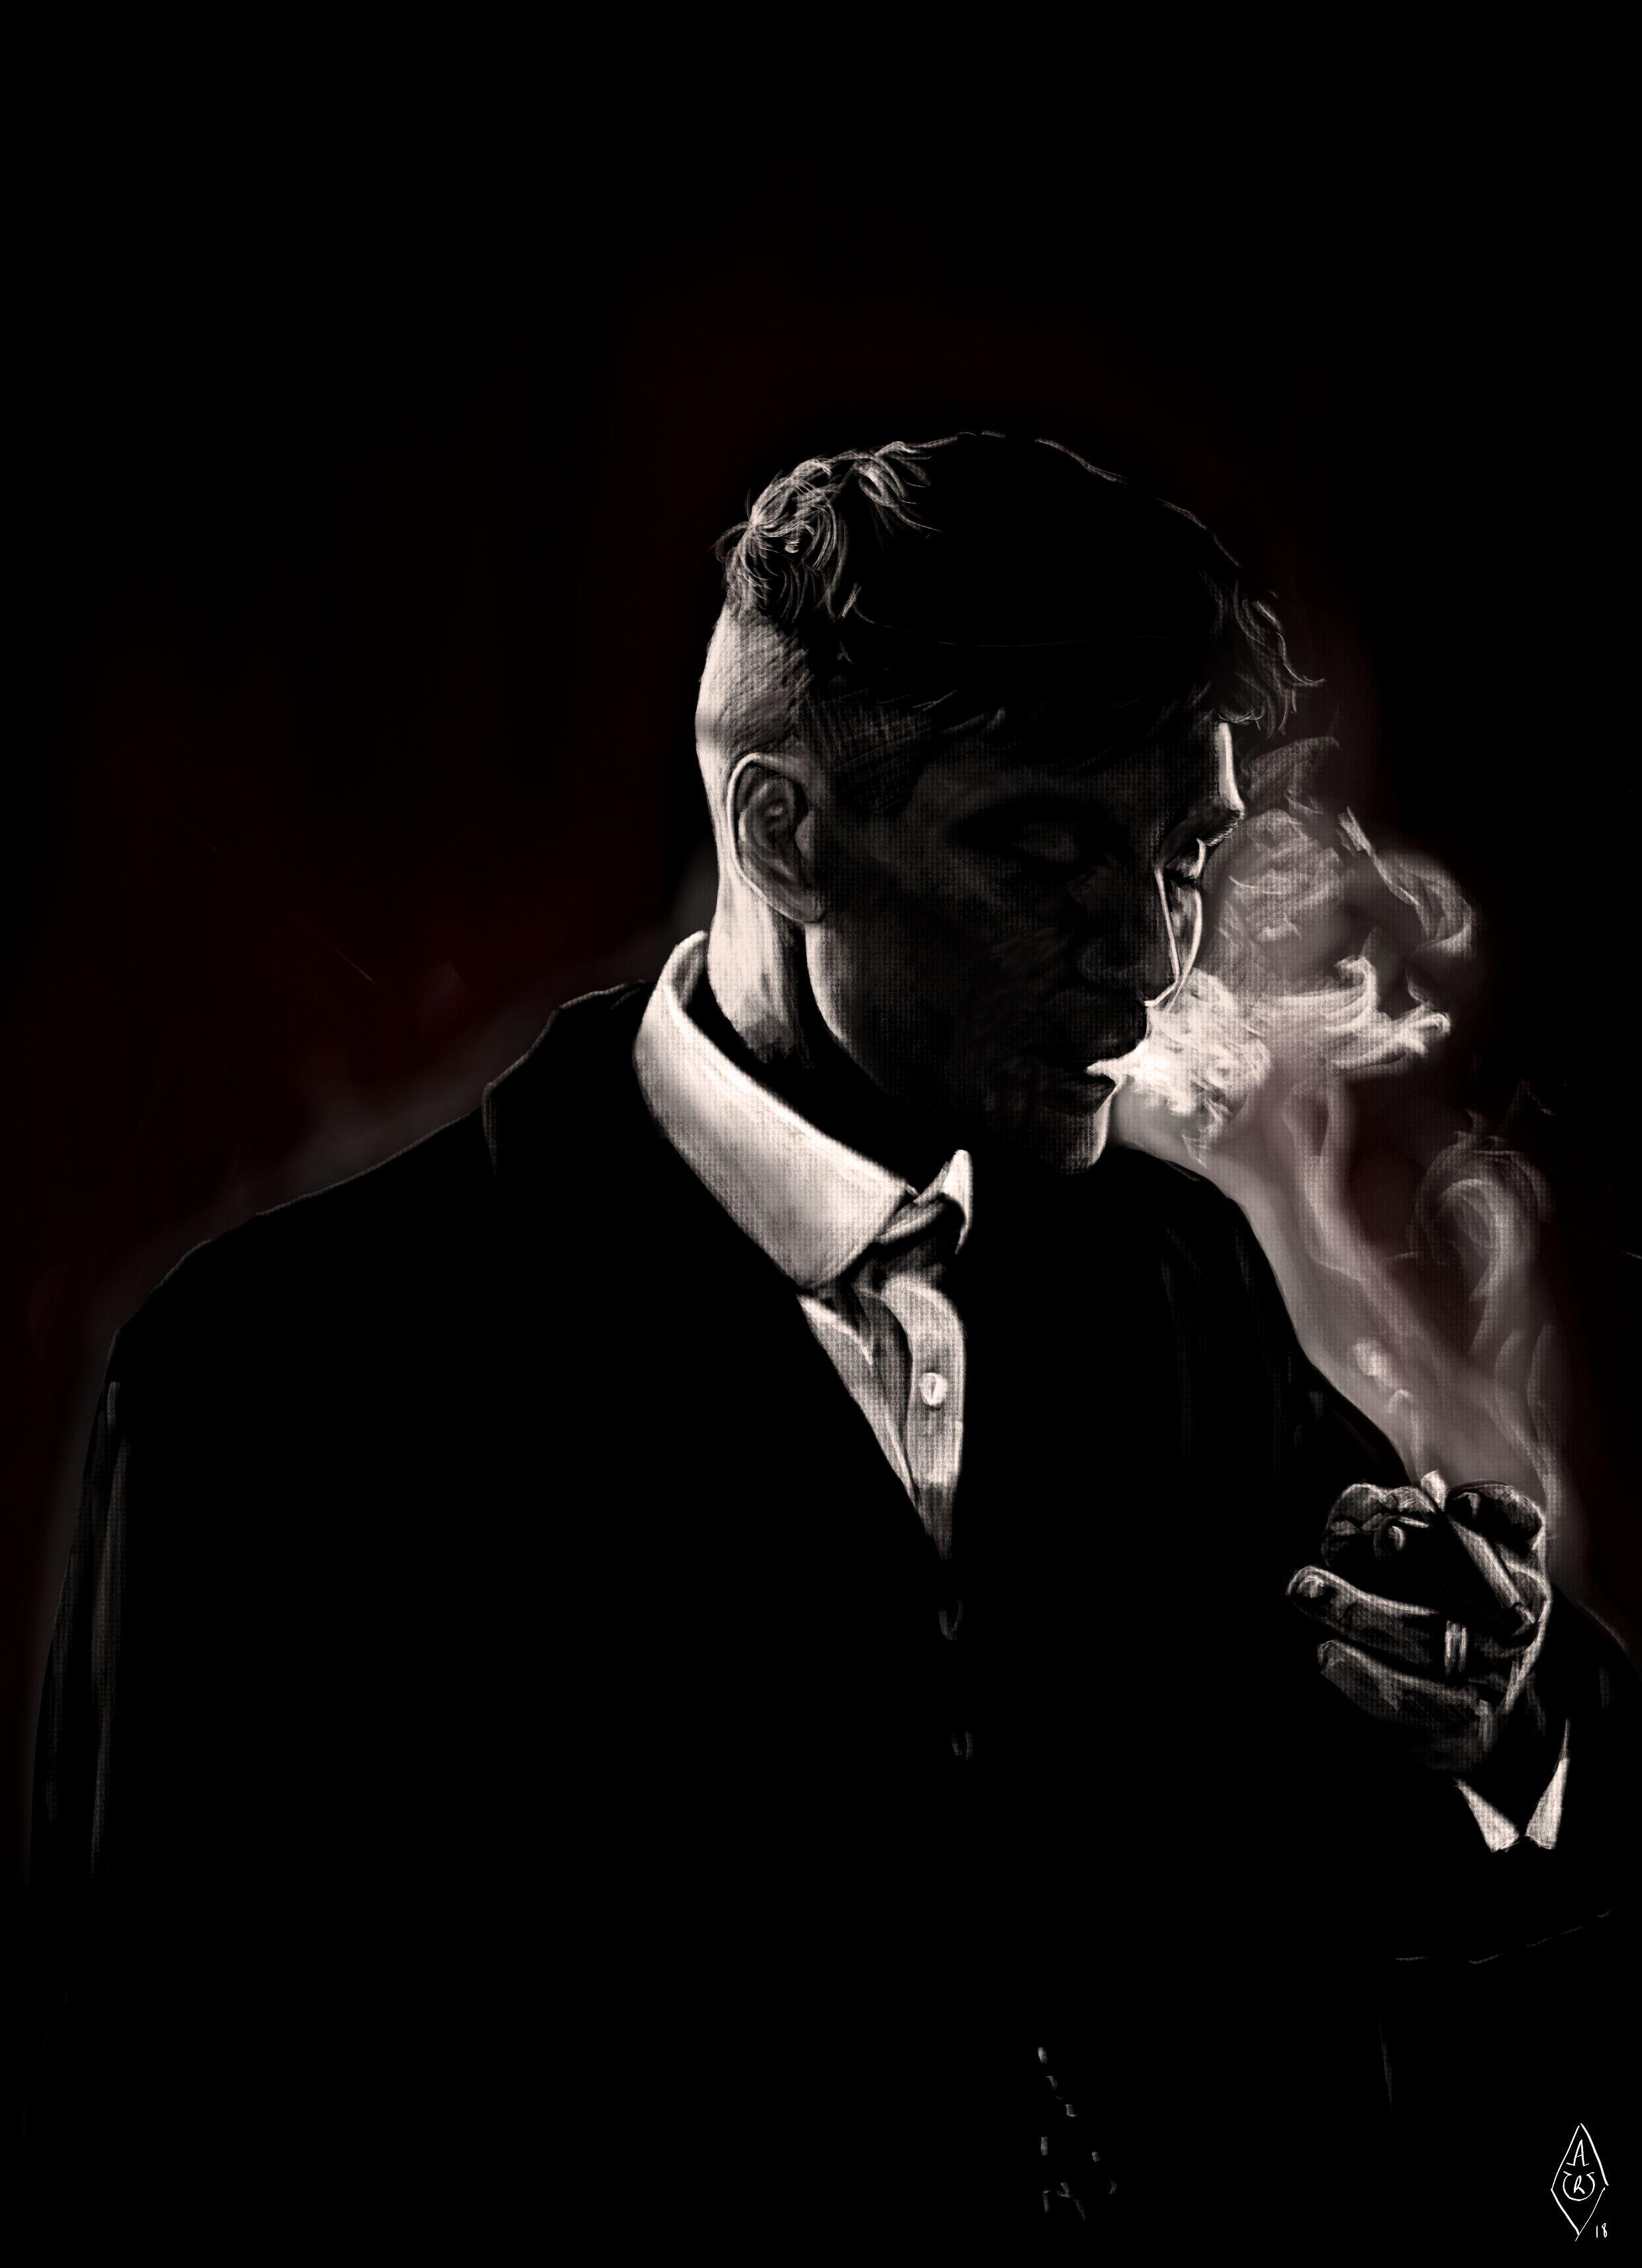 Portrait of Thomas Shelby from Peaky Blinders. Drawn with my Wacom